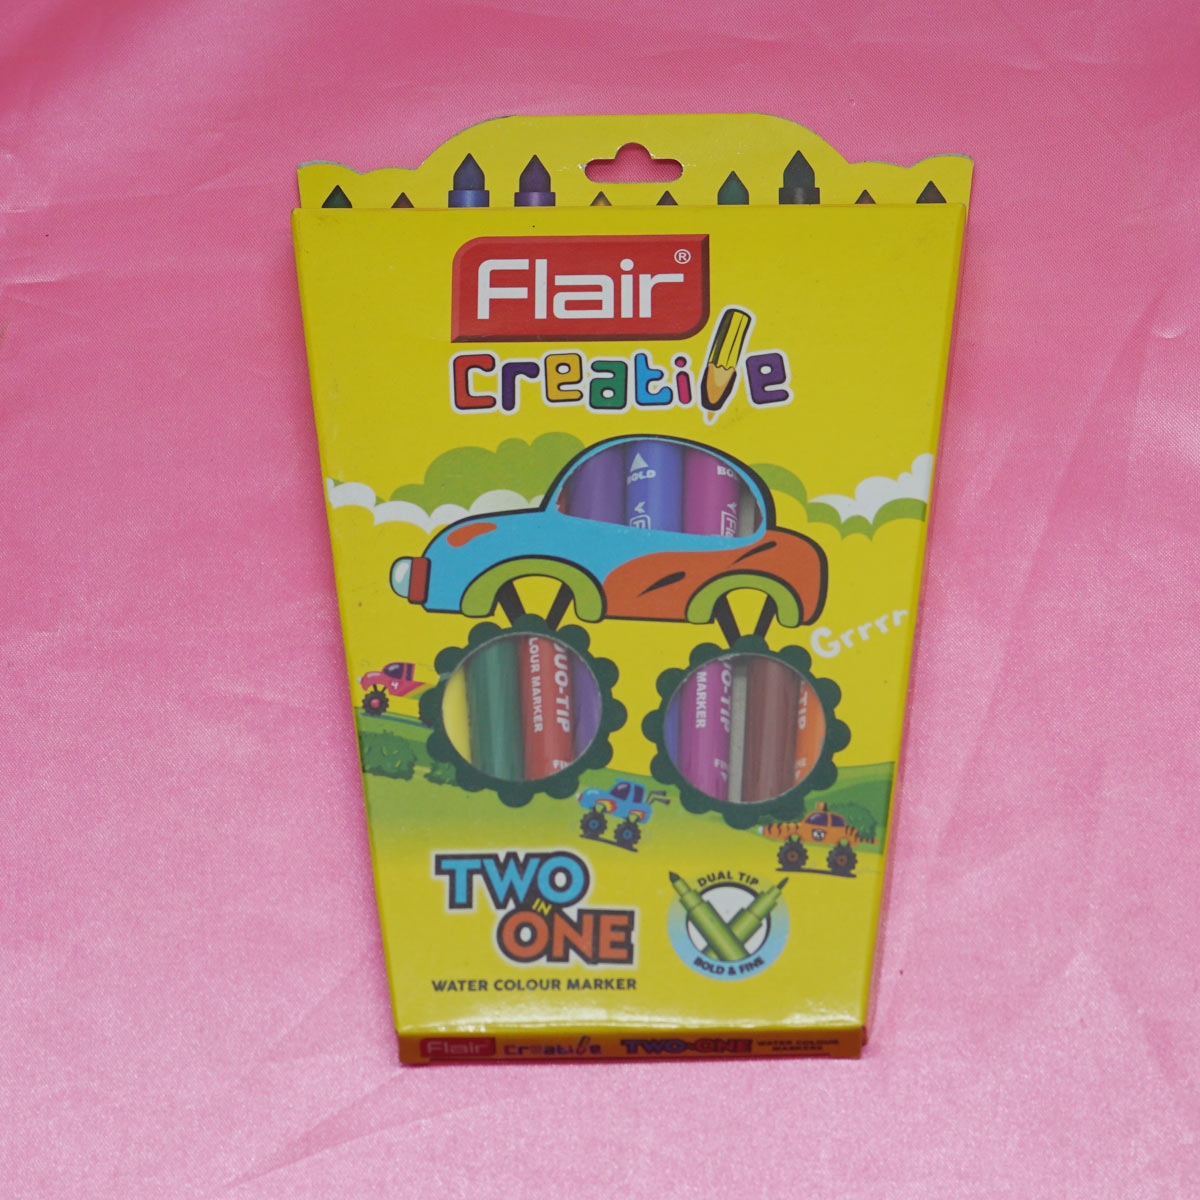 Flair Creative Two in One Water Color Marker DUO Fine Tip Pack of 10 SKU 22027